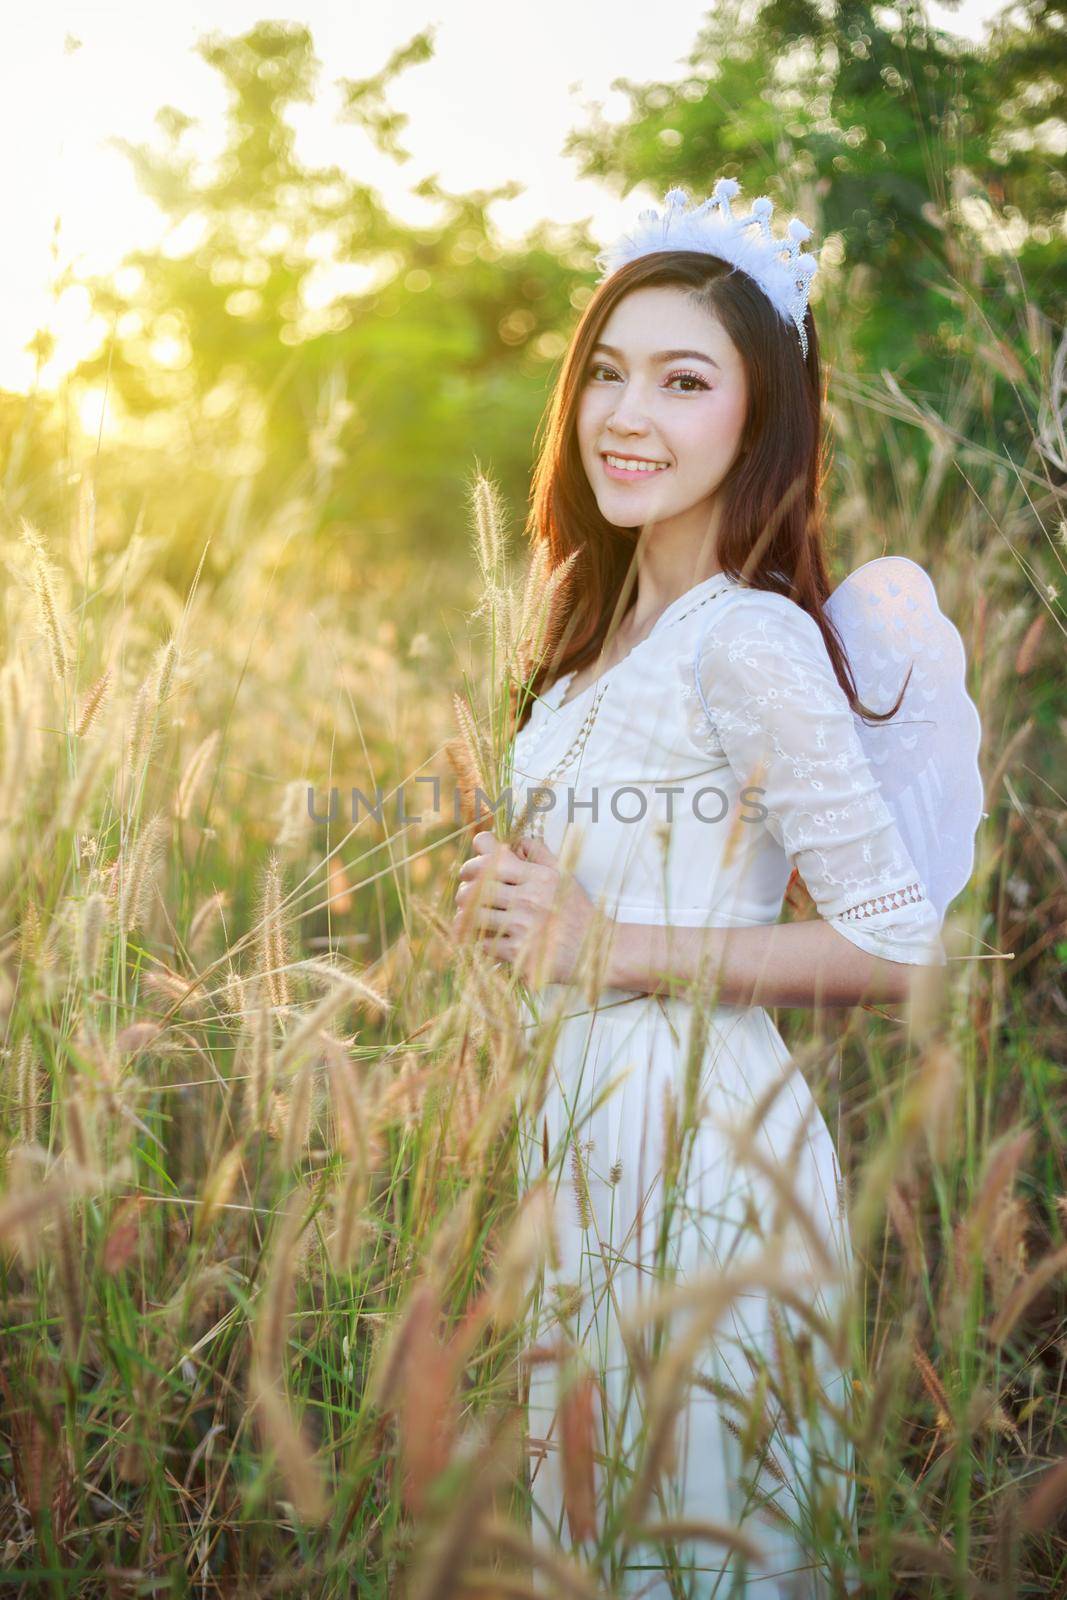 beautiful angel woman in a grass field with sunlight